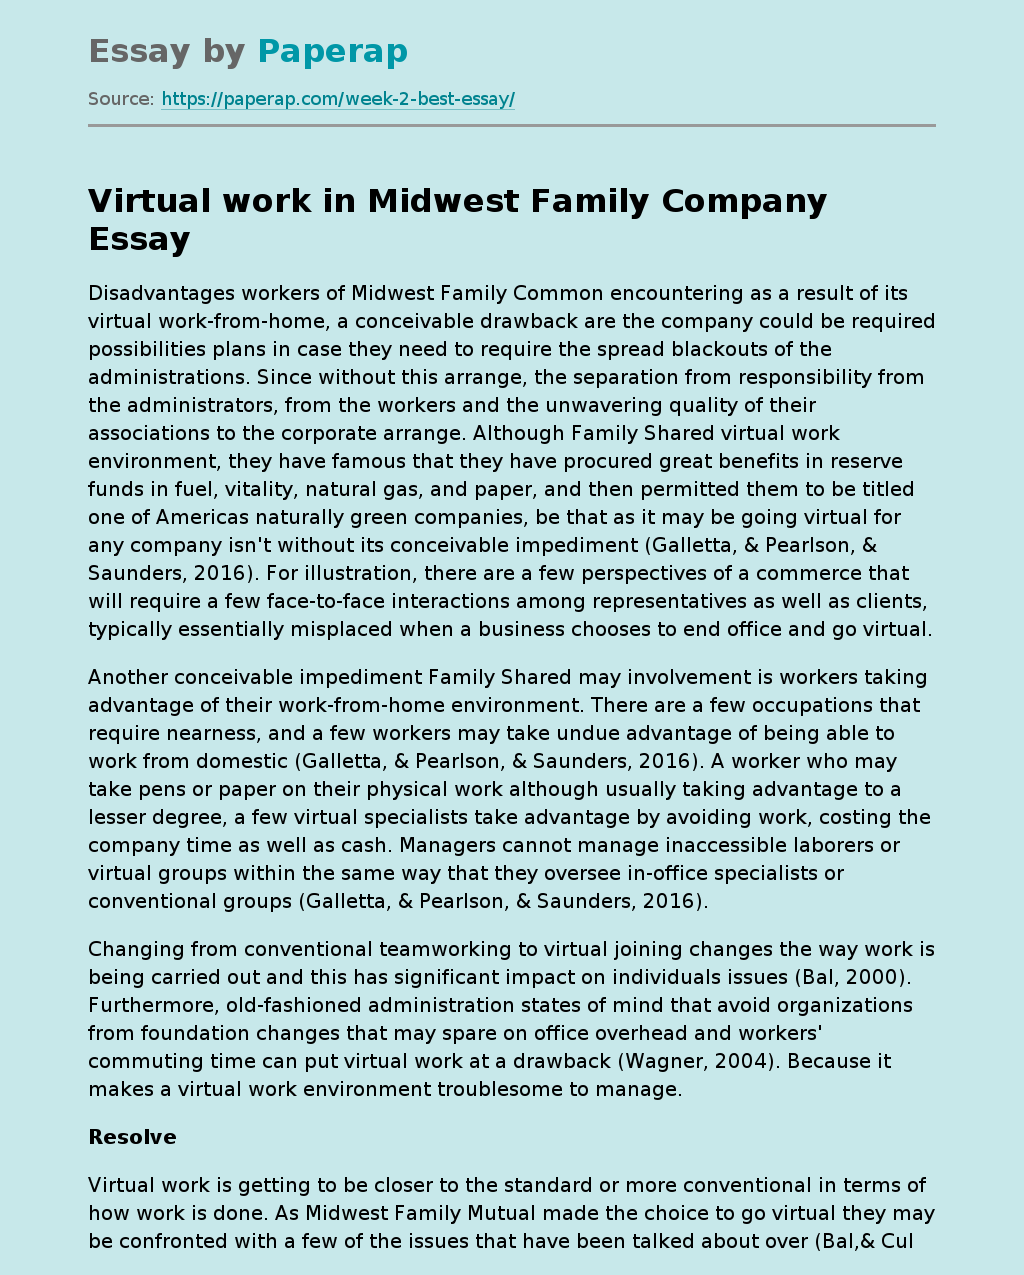 Virtual work in Midwest Family Company